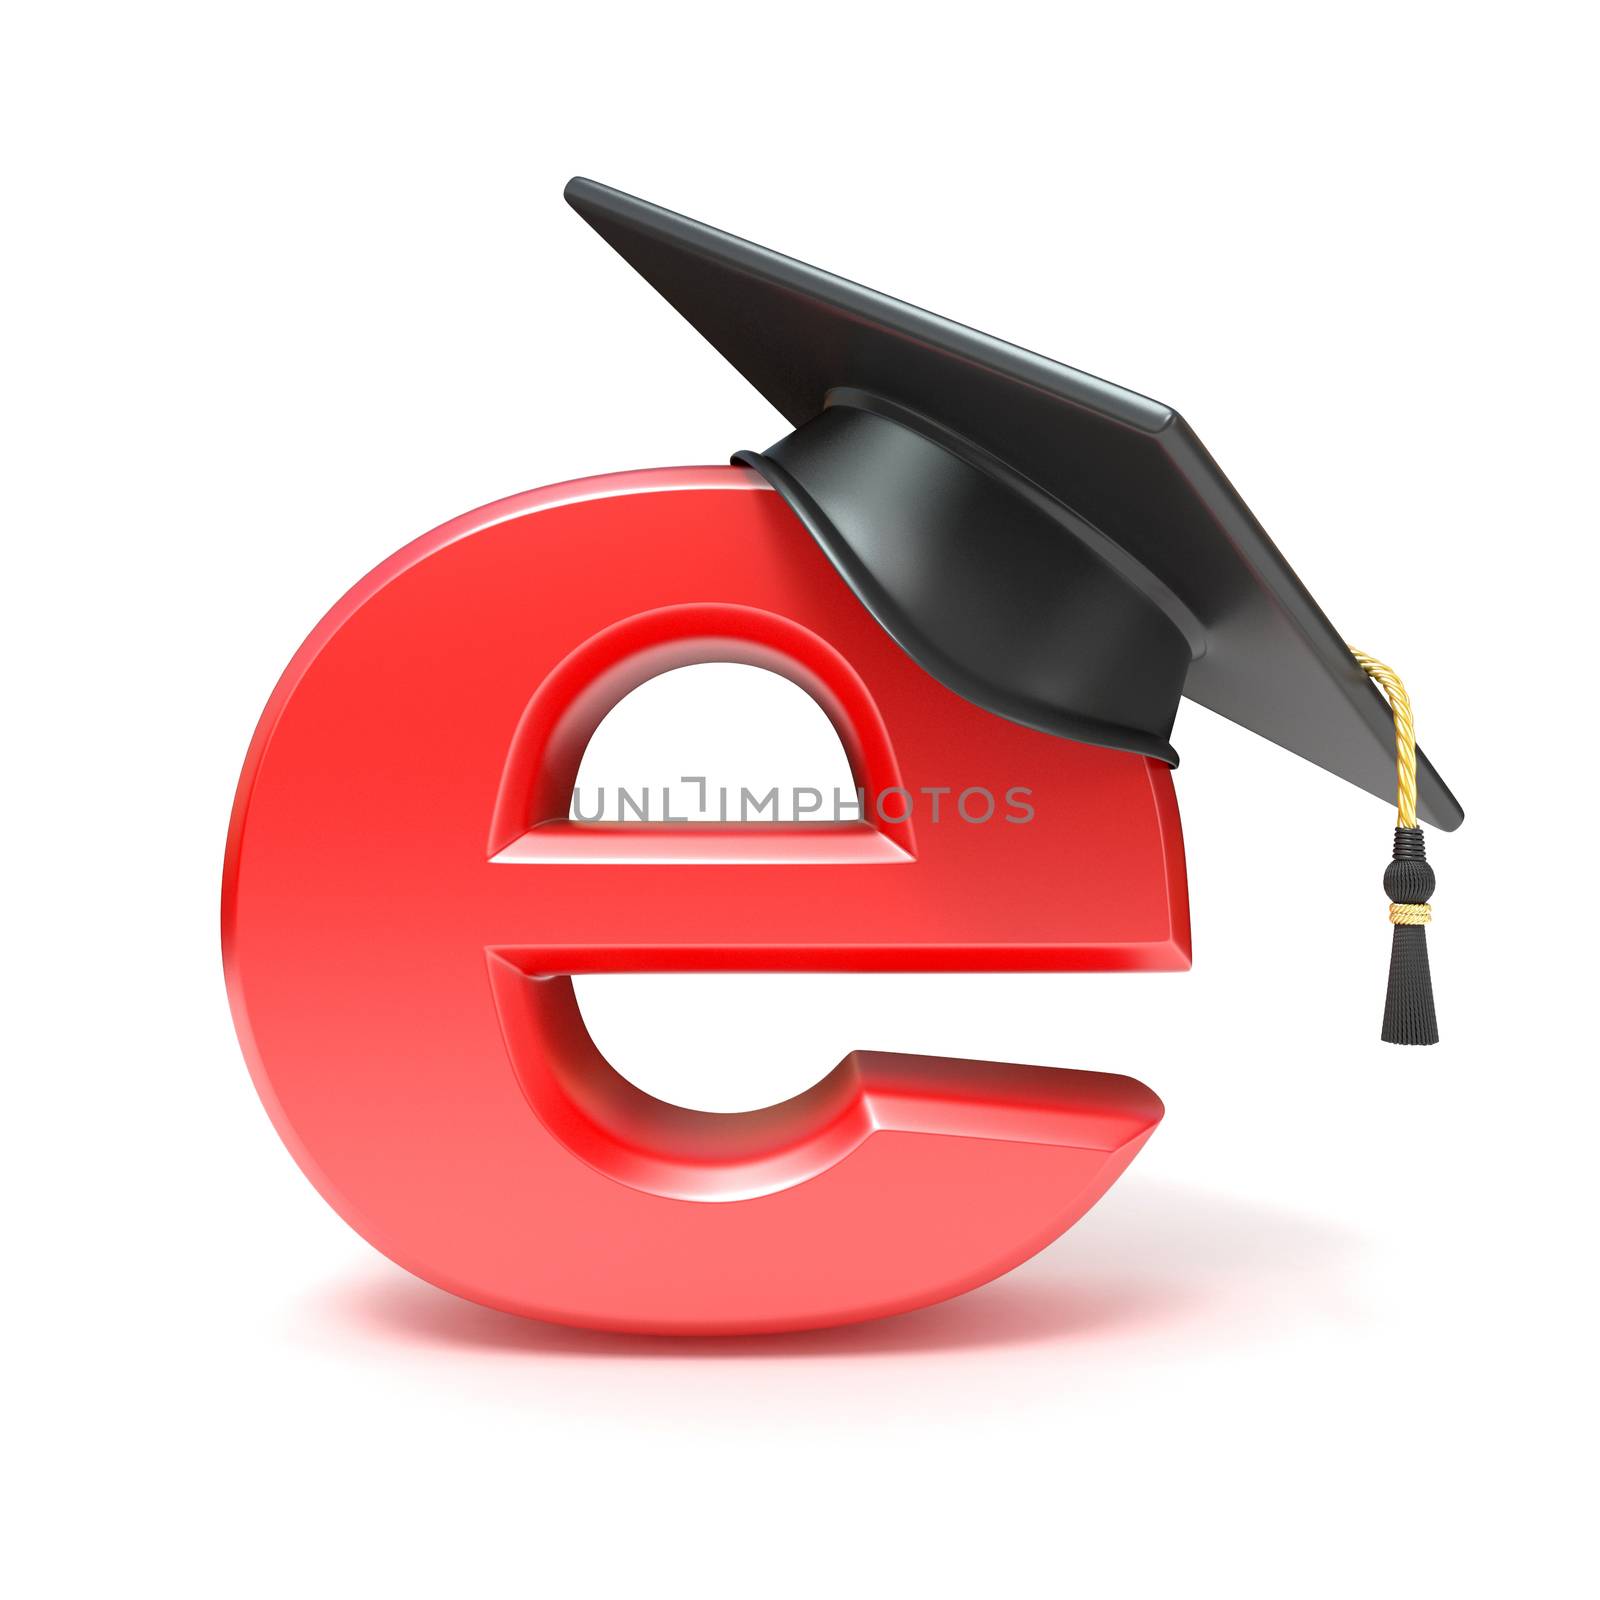 Graduation hat on E. E-learning concept. 3D render illustration isolated on white background